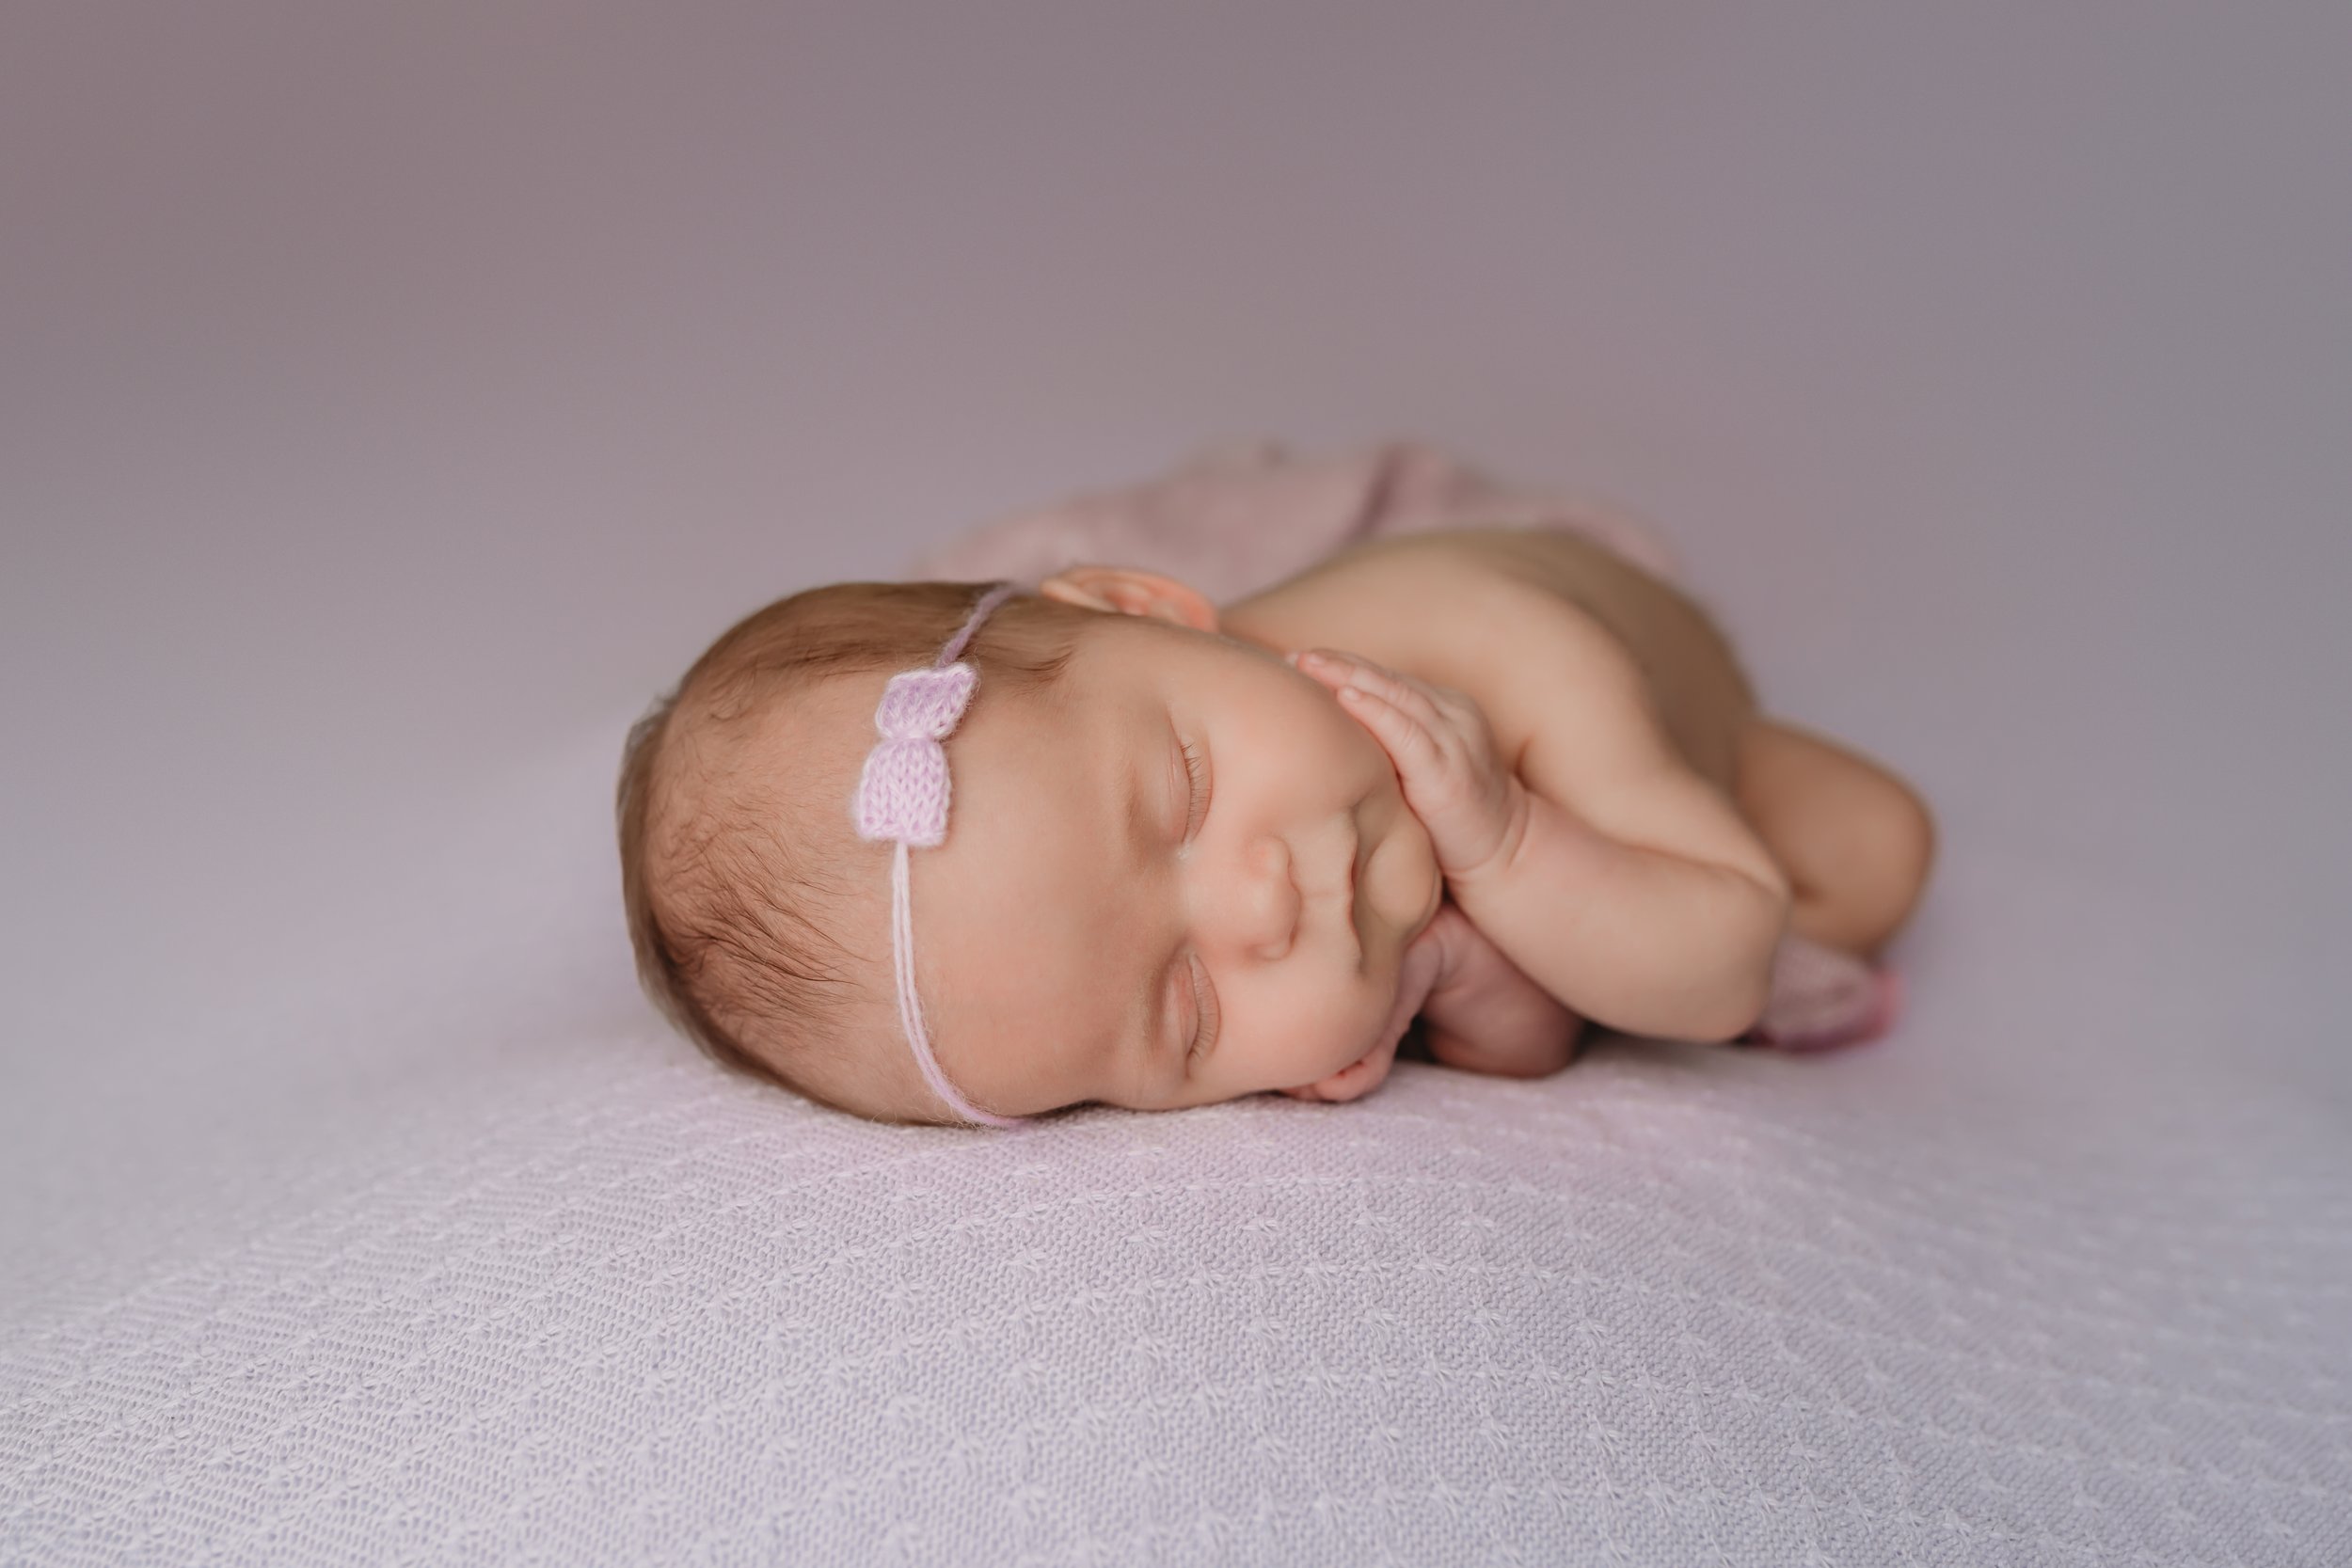 Boca-Raton-Newborn-Photographer-Baby-in-purple-with-face-in-hands